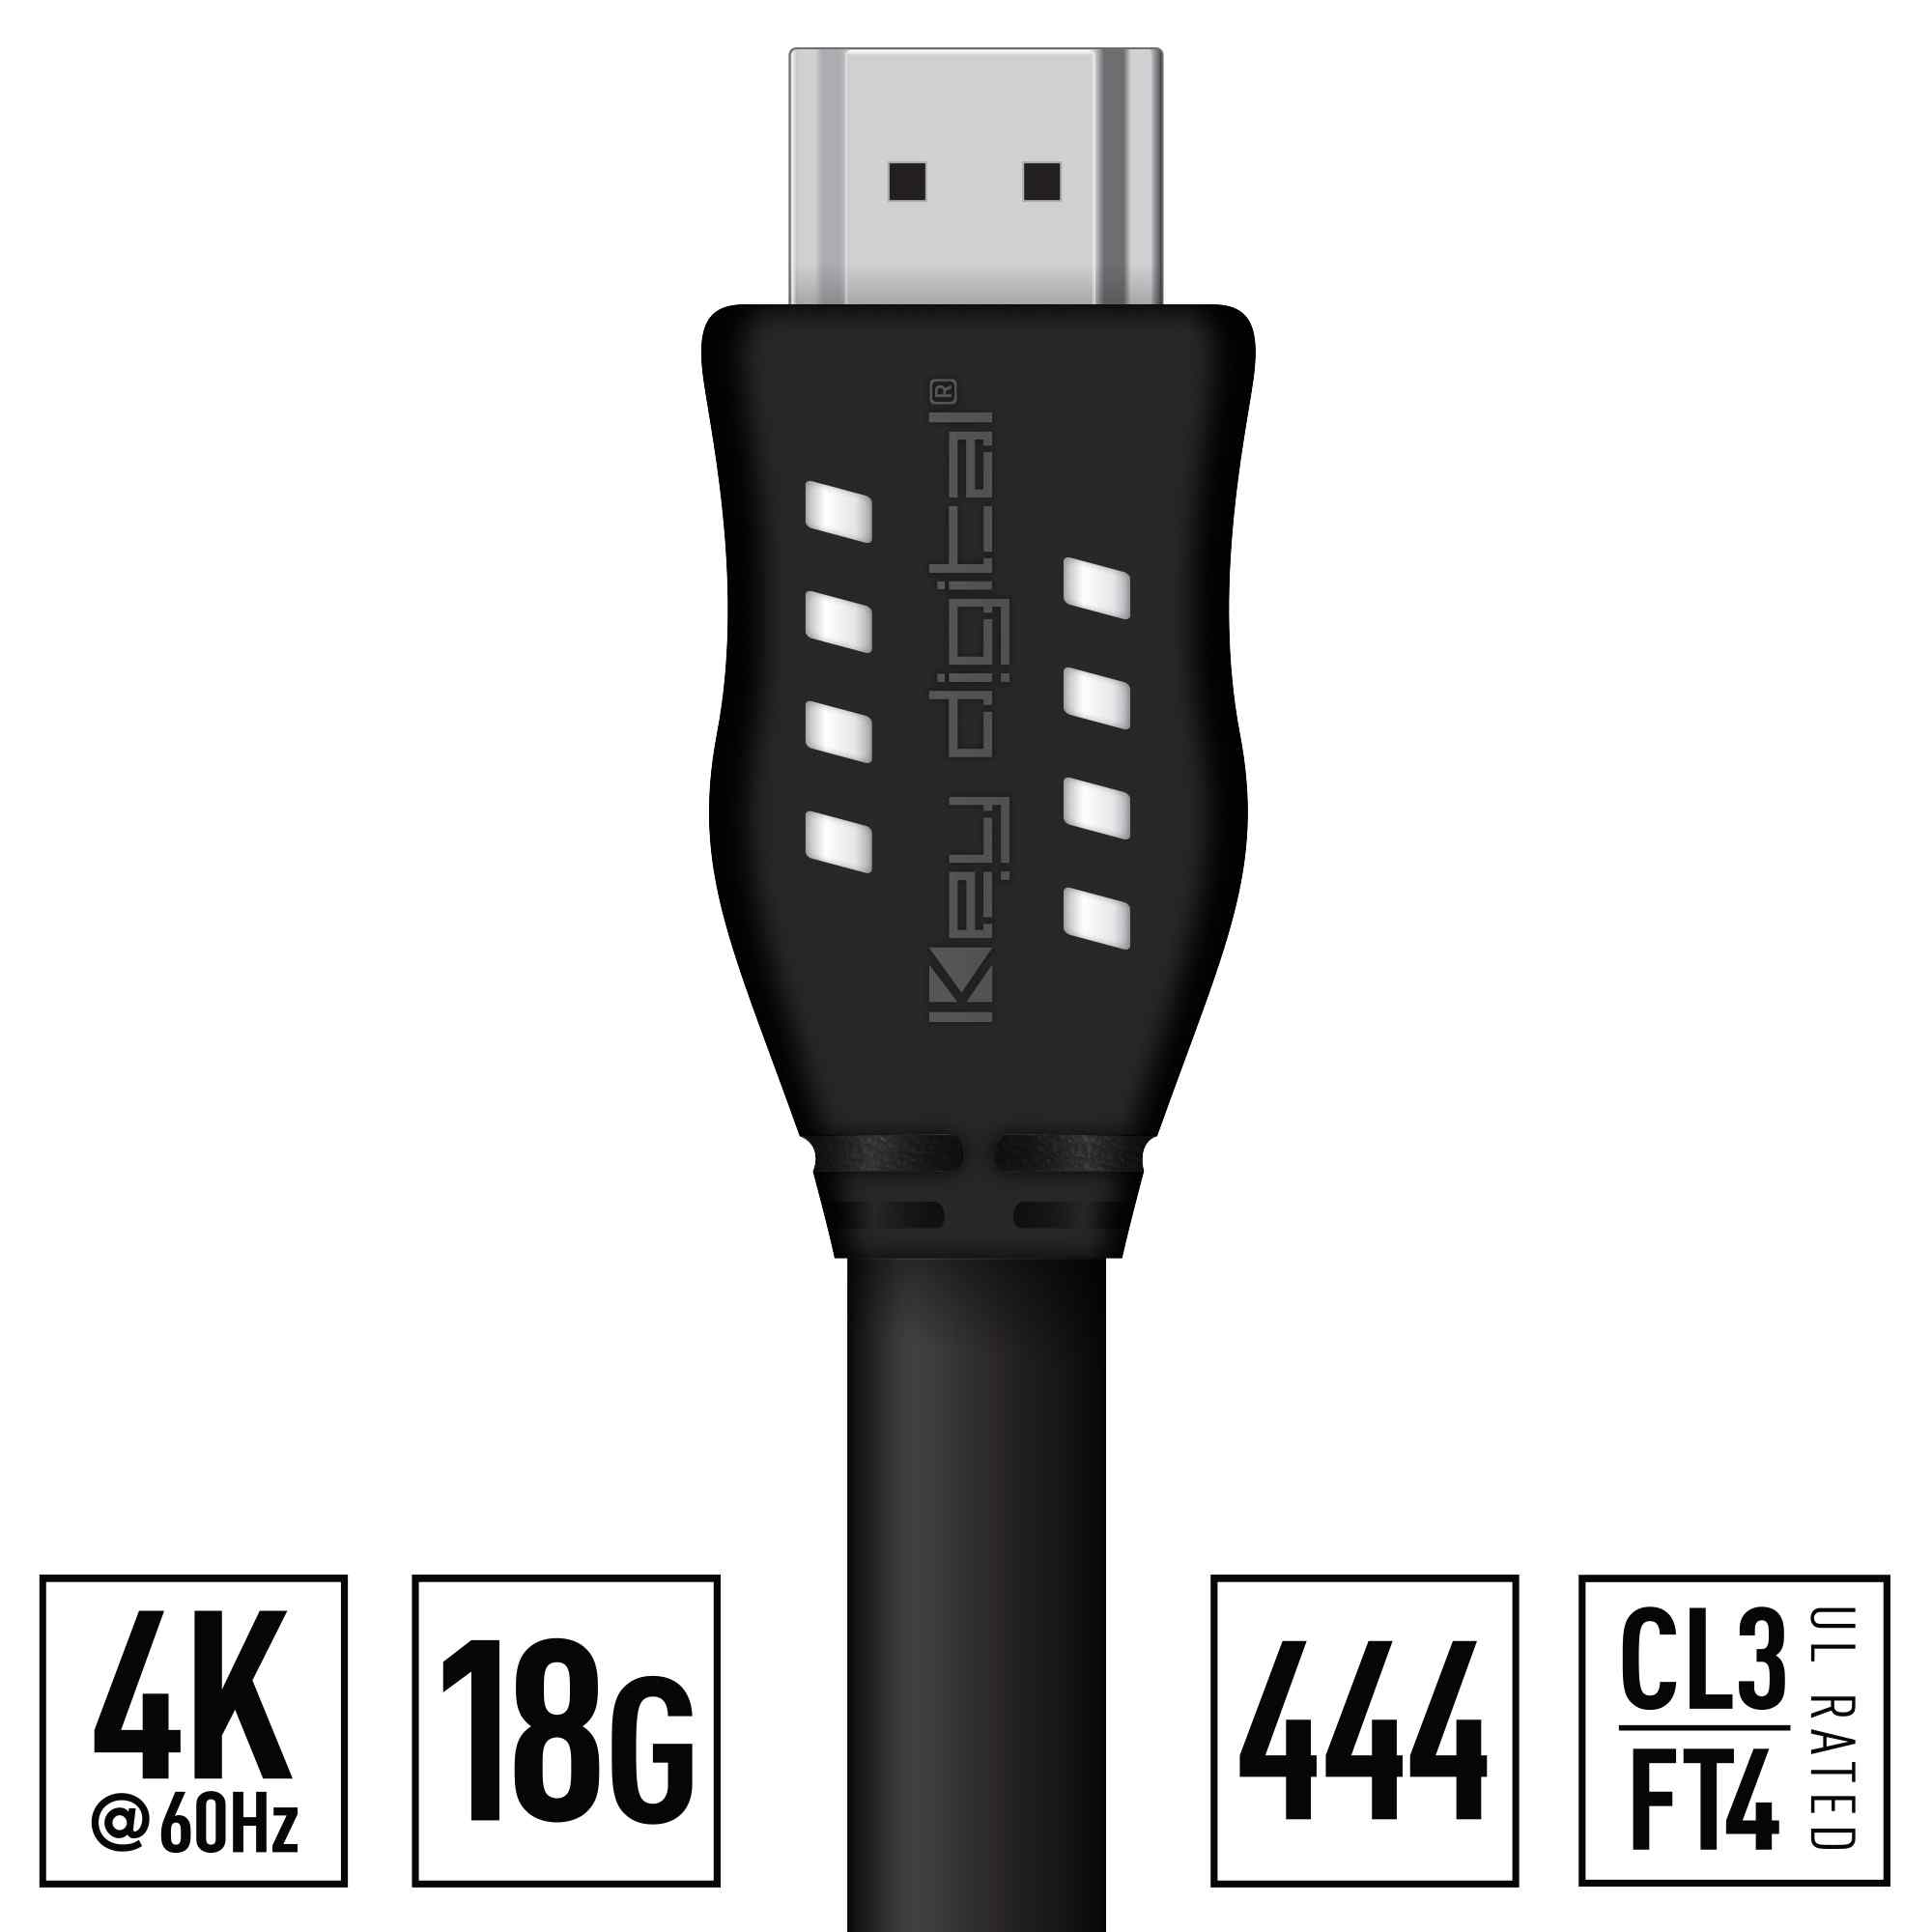 Key Digital HDMI cable slim front view